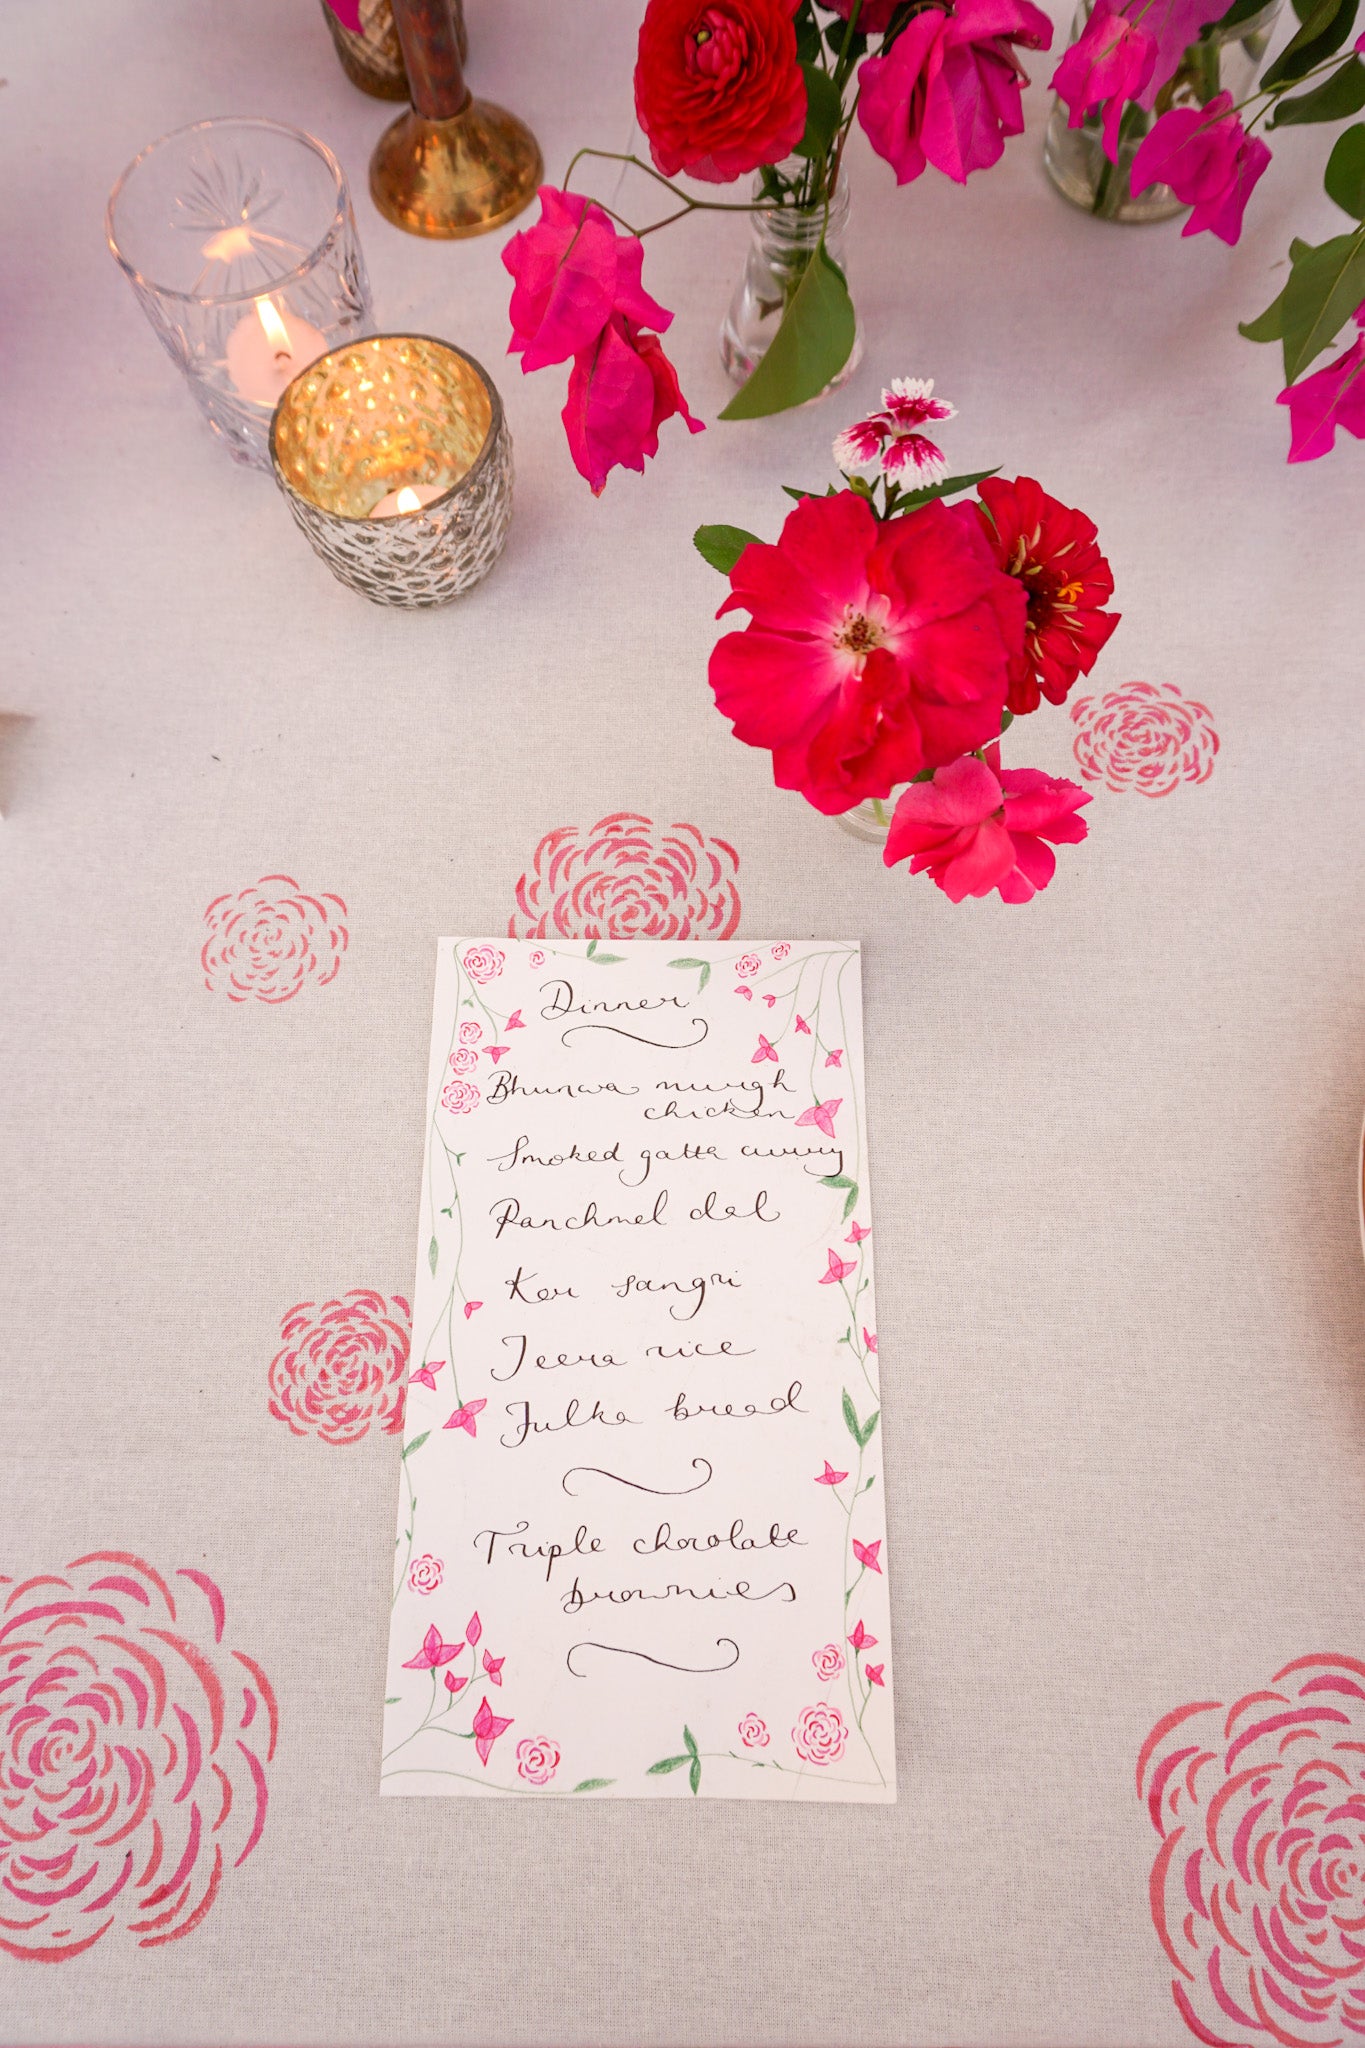 Menu with rose paintings and calligraphy